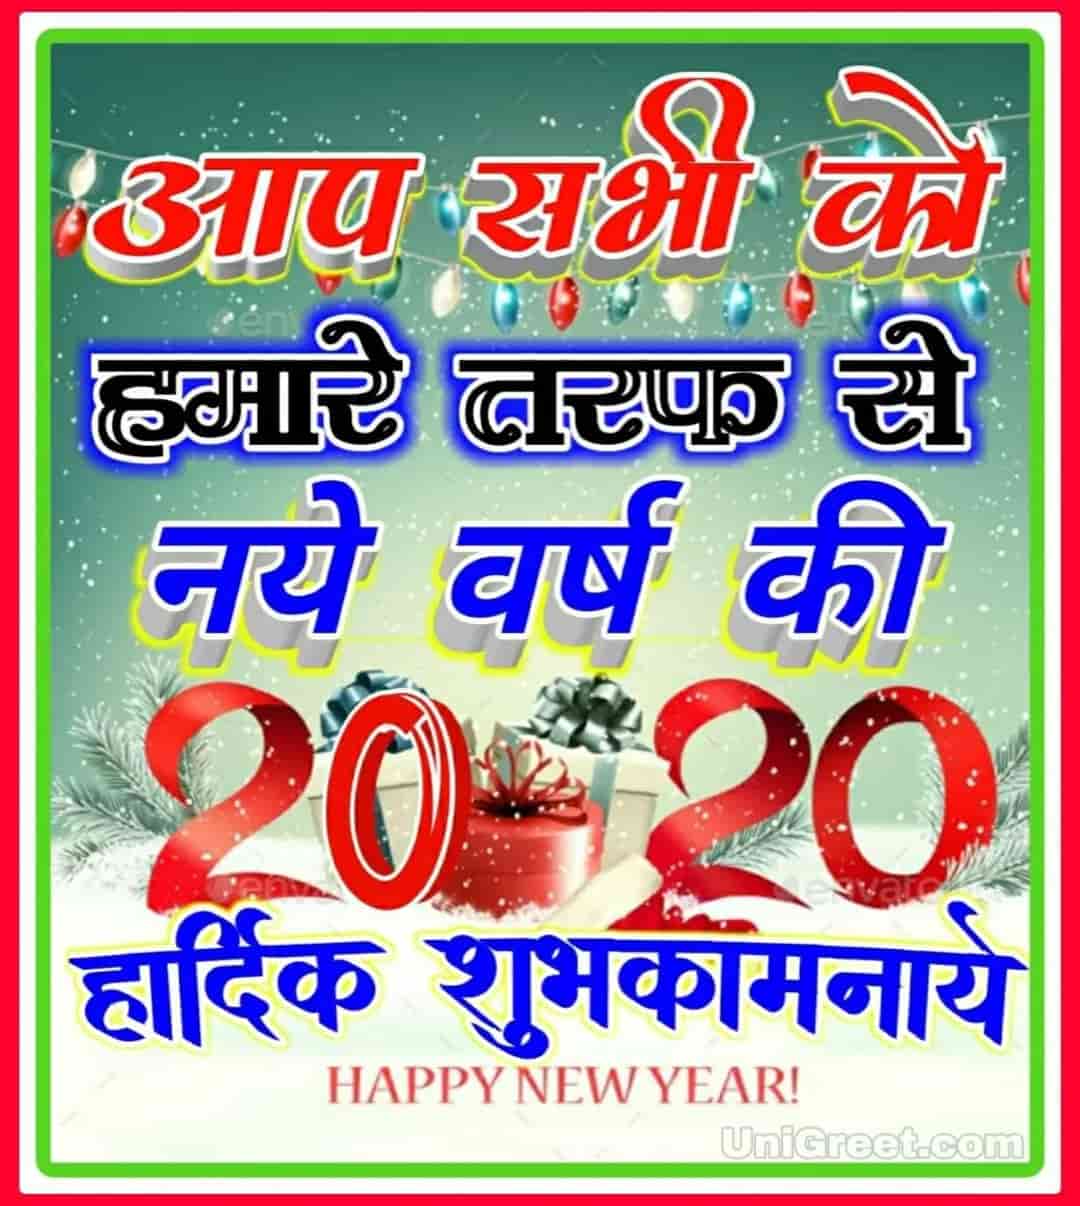 Best 2020 Hindi Happy New Year Wishes Images For Friends And ...